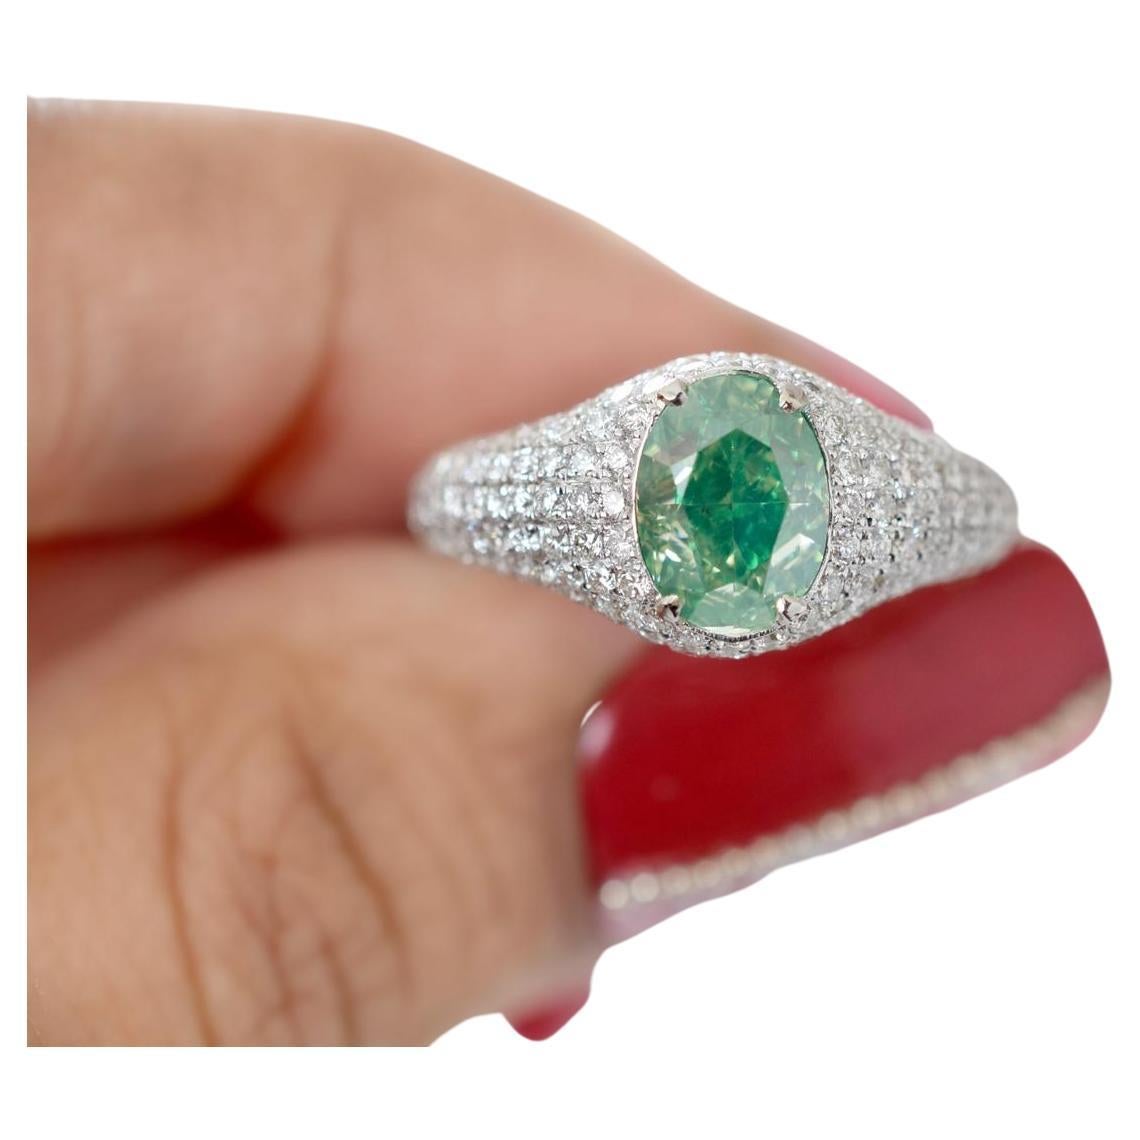 1.52 Carat Fancy Green Yellow Diamond Ring I1 Clarity GIA Certified For Sale